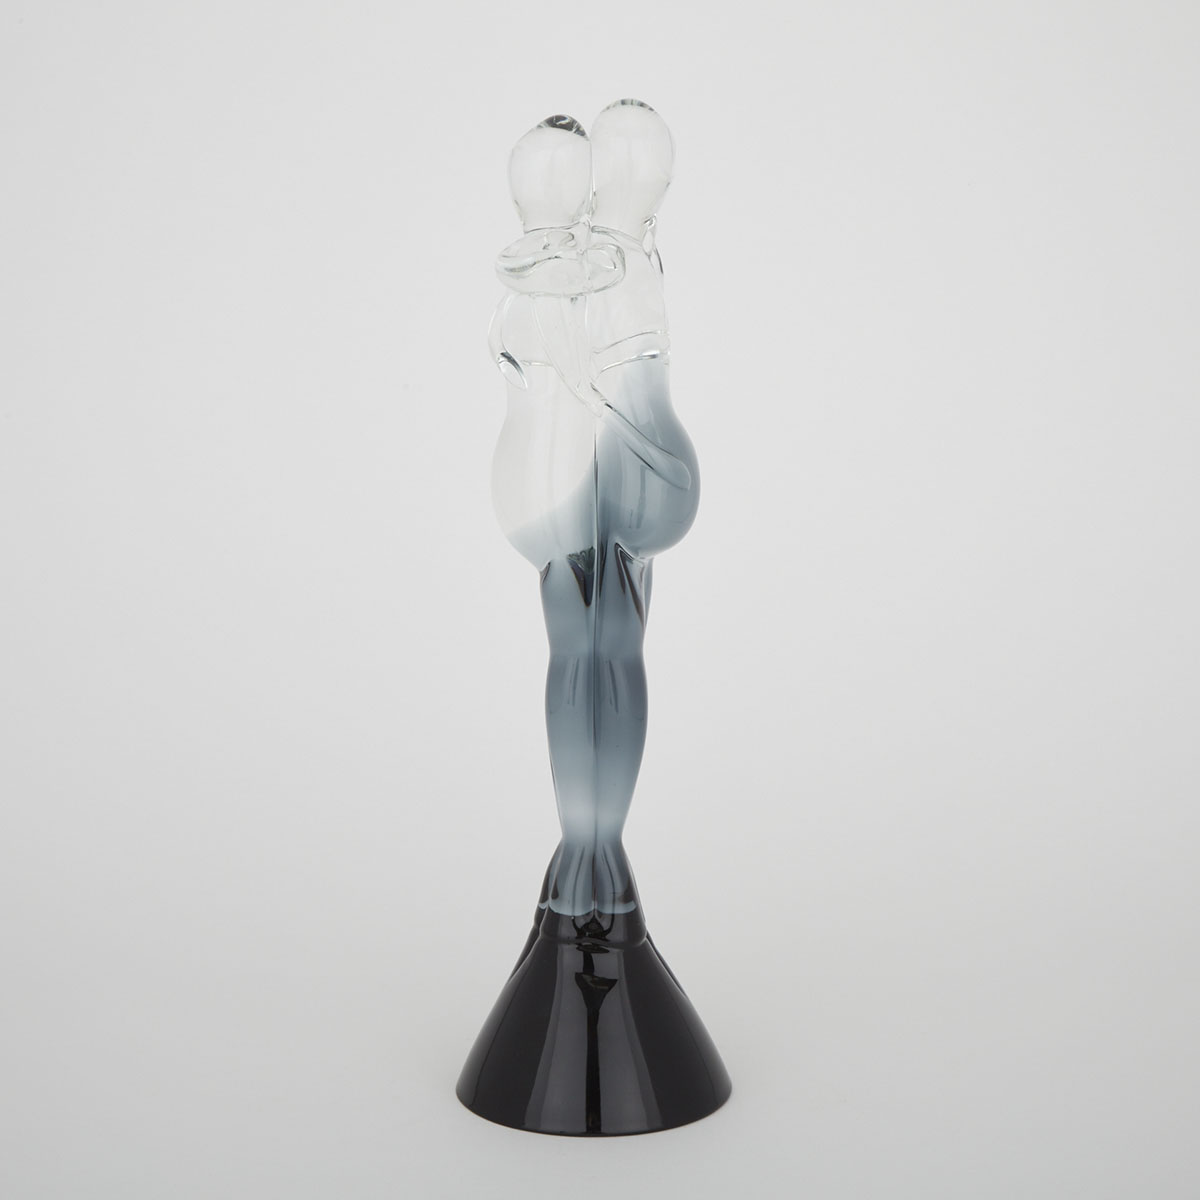 Murano Glass Sculpture of an Embracing Couple, c.1980